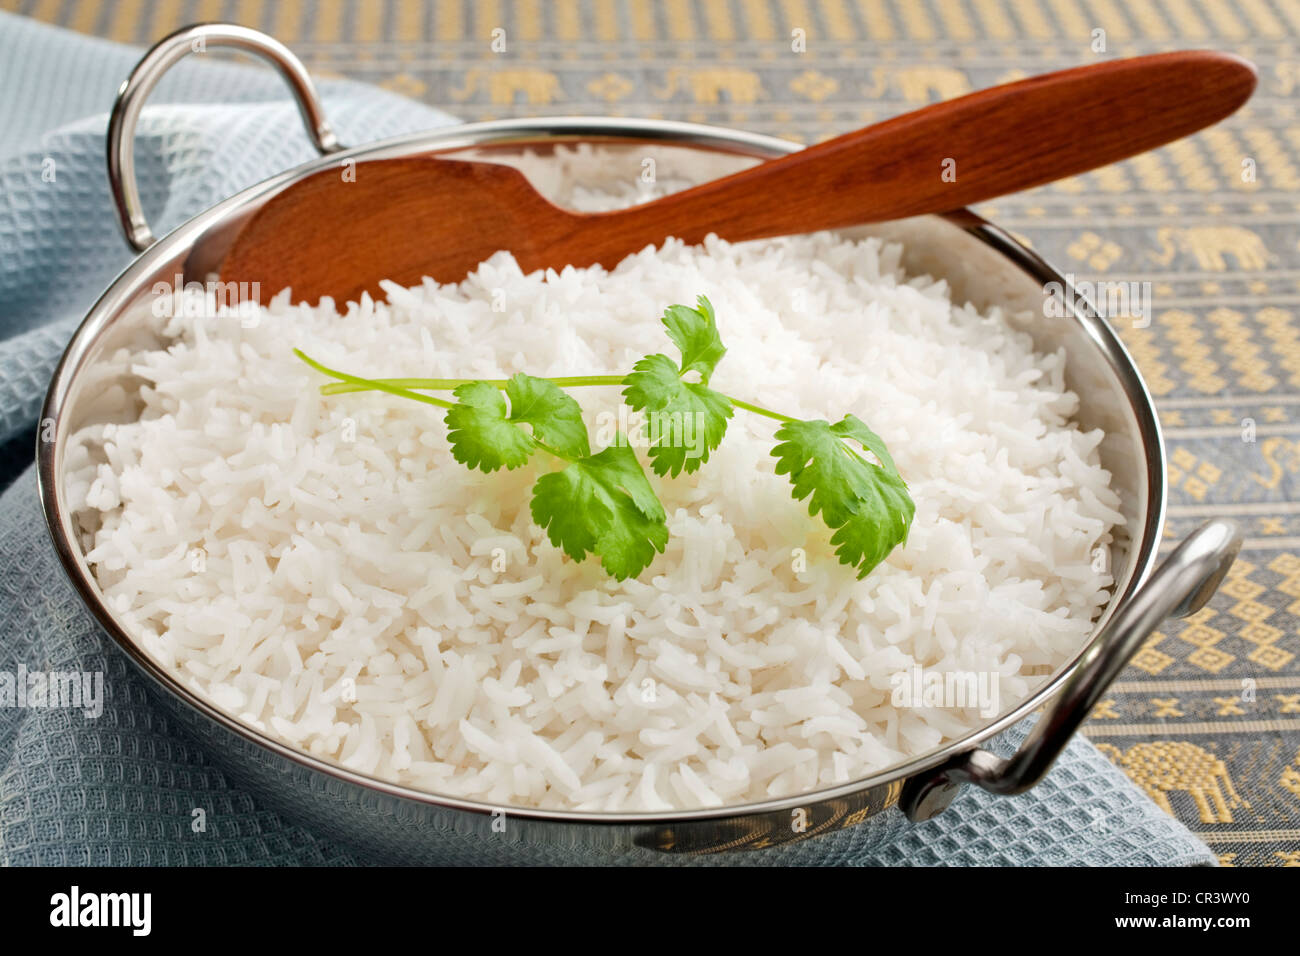 Basmati rice in a steel karahi, garnished with coriander,with a wooden spoon. Stock Photo